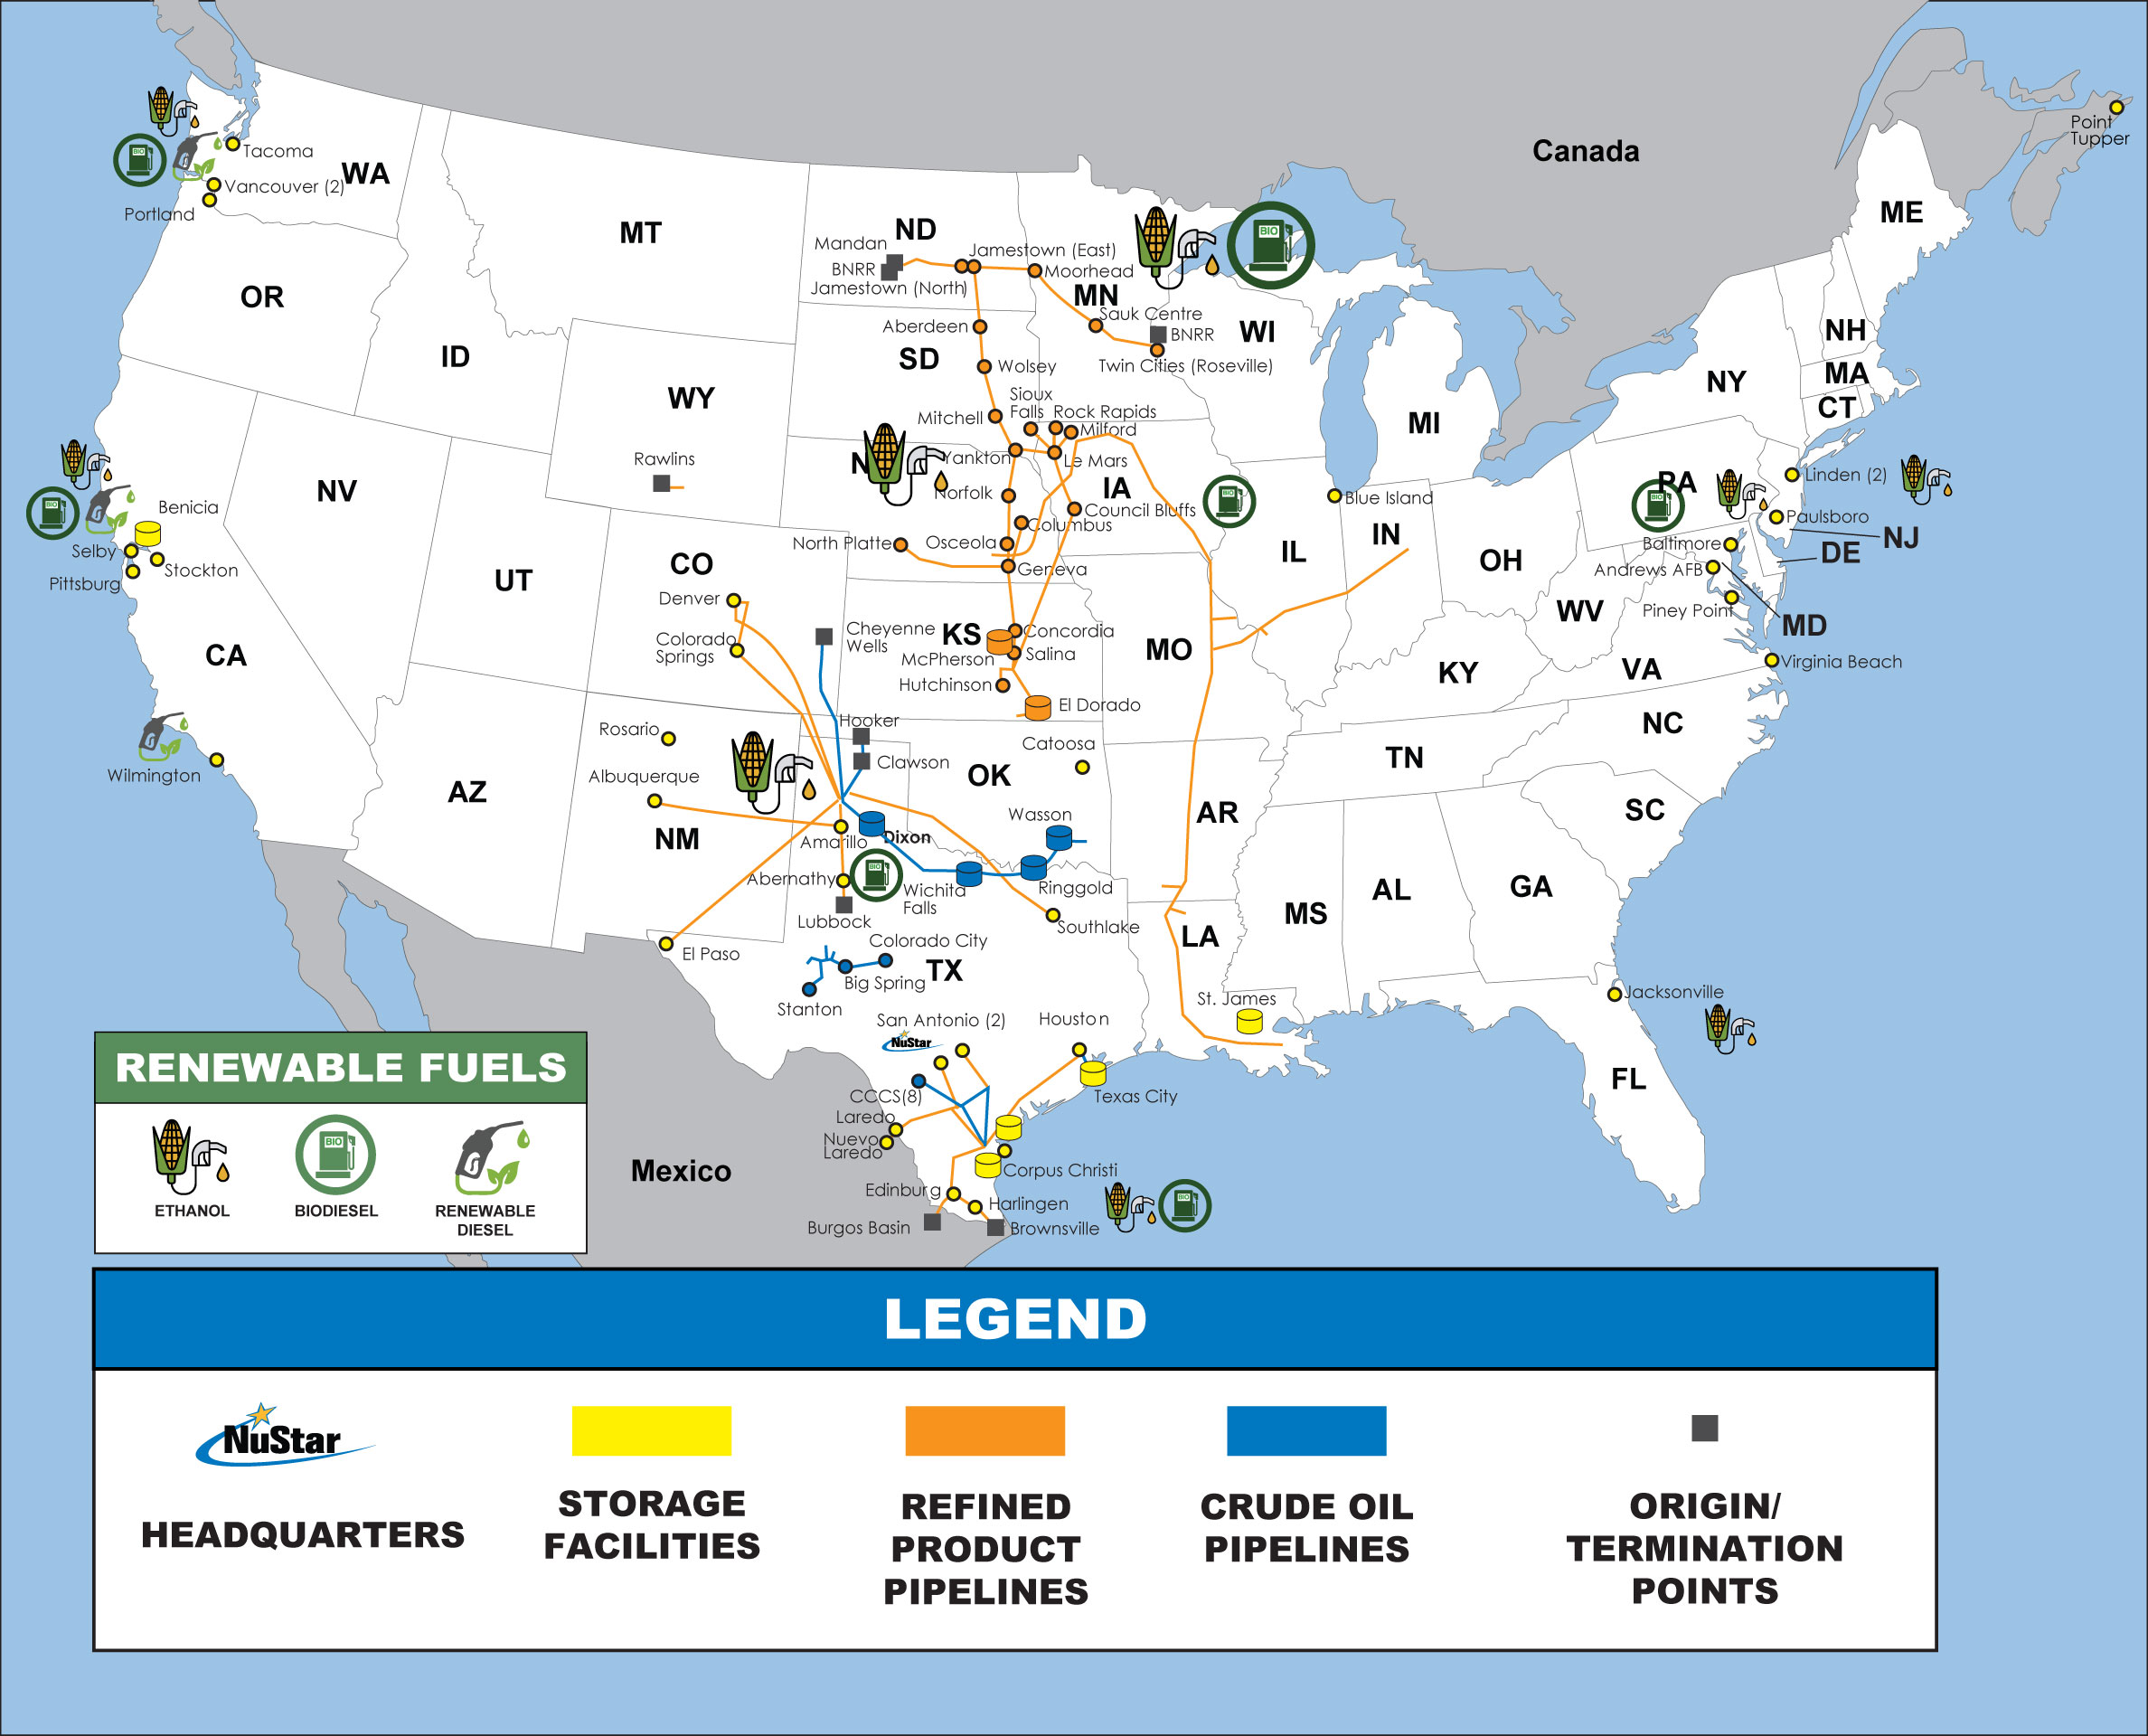 Map of North America showing NuStar’s headquarters located in San Antonio, TX. The map highlights renewable fuels of location of ethanol, biodiesel and renewable diesel.